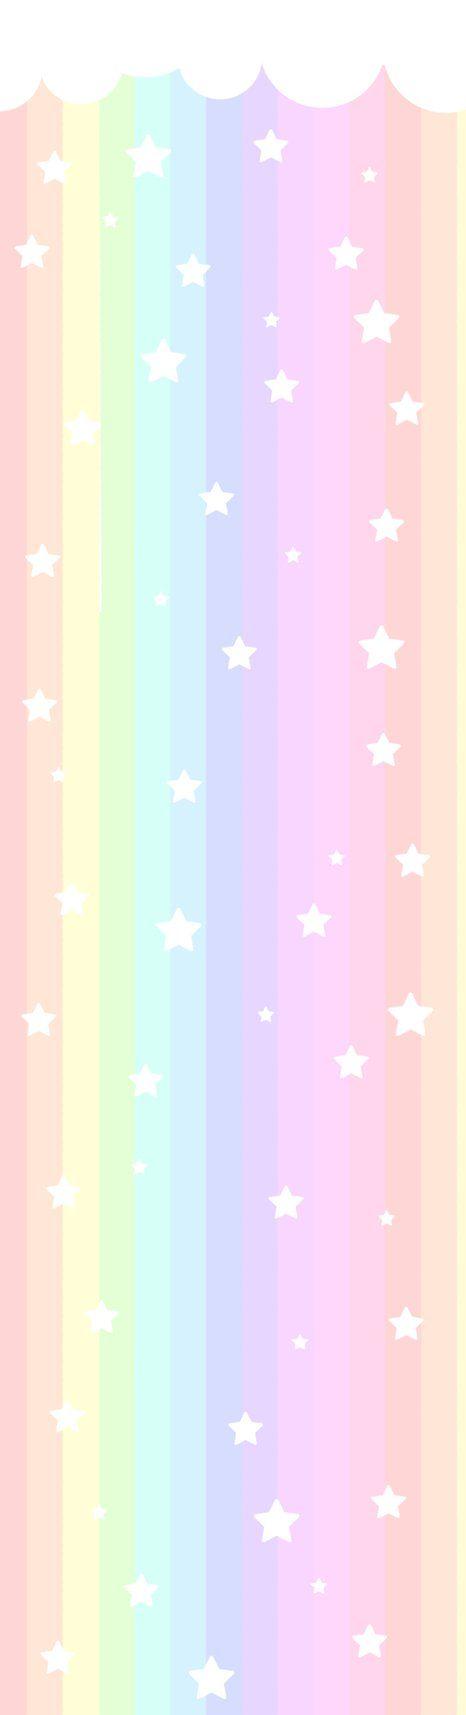 Featured image of post Cute Pastel Backrounds - Check out our pastel backgrounds selection for the very best in unique or custom, handmade pieces from our shops.